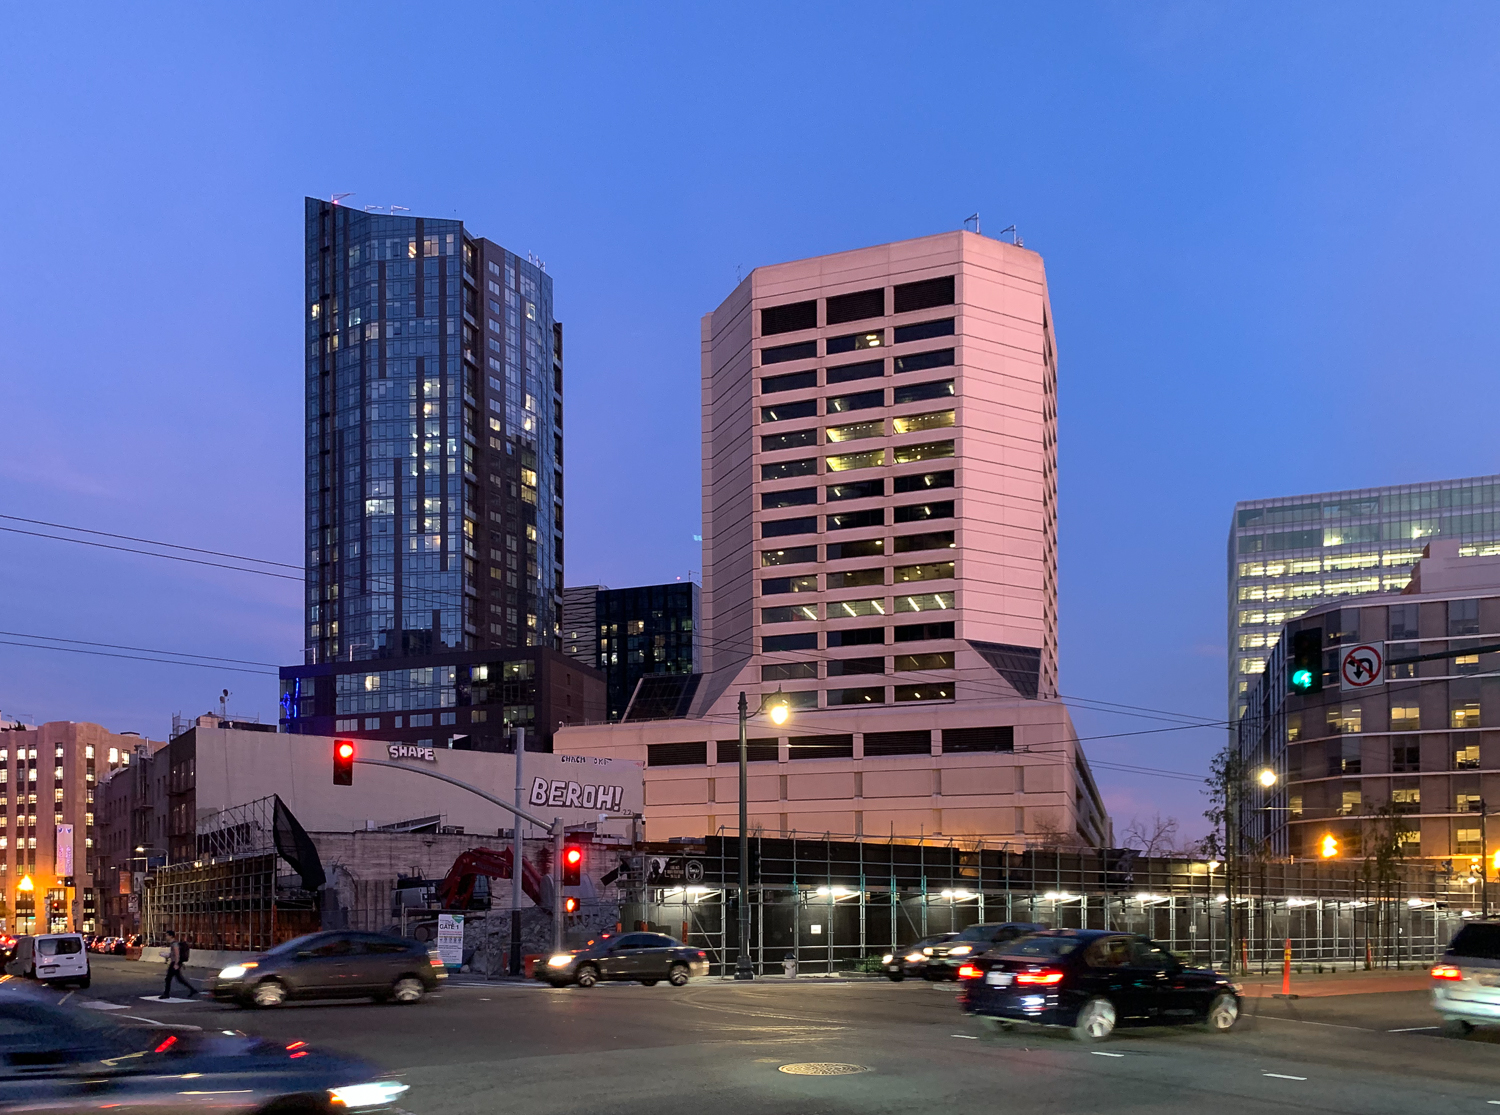 30 Van Ness Avenue site, looking toward NEMA and 1455 Market Street, image by Andrew Campbell Nelson